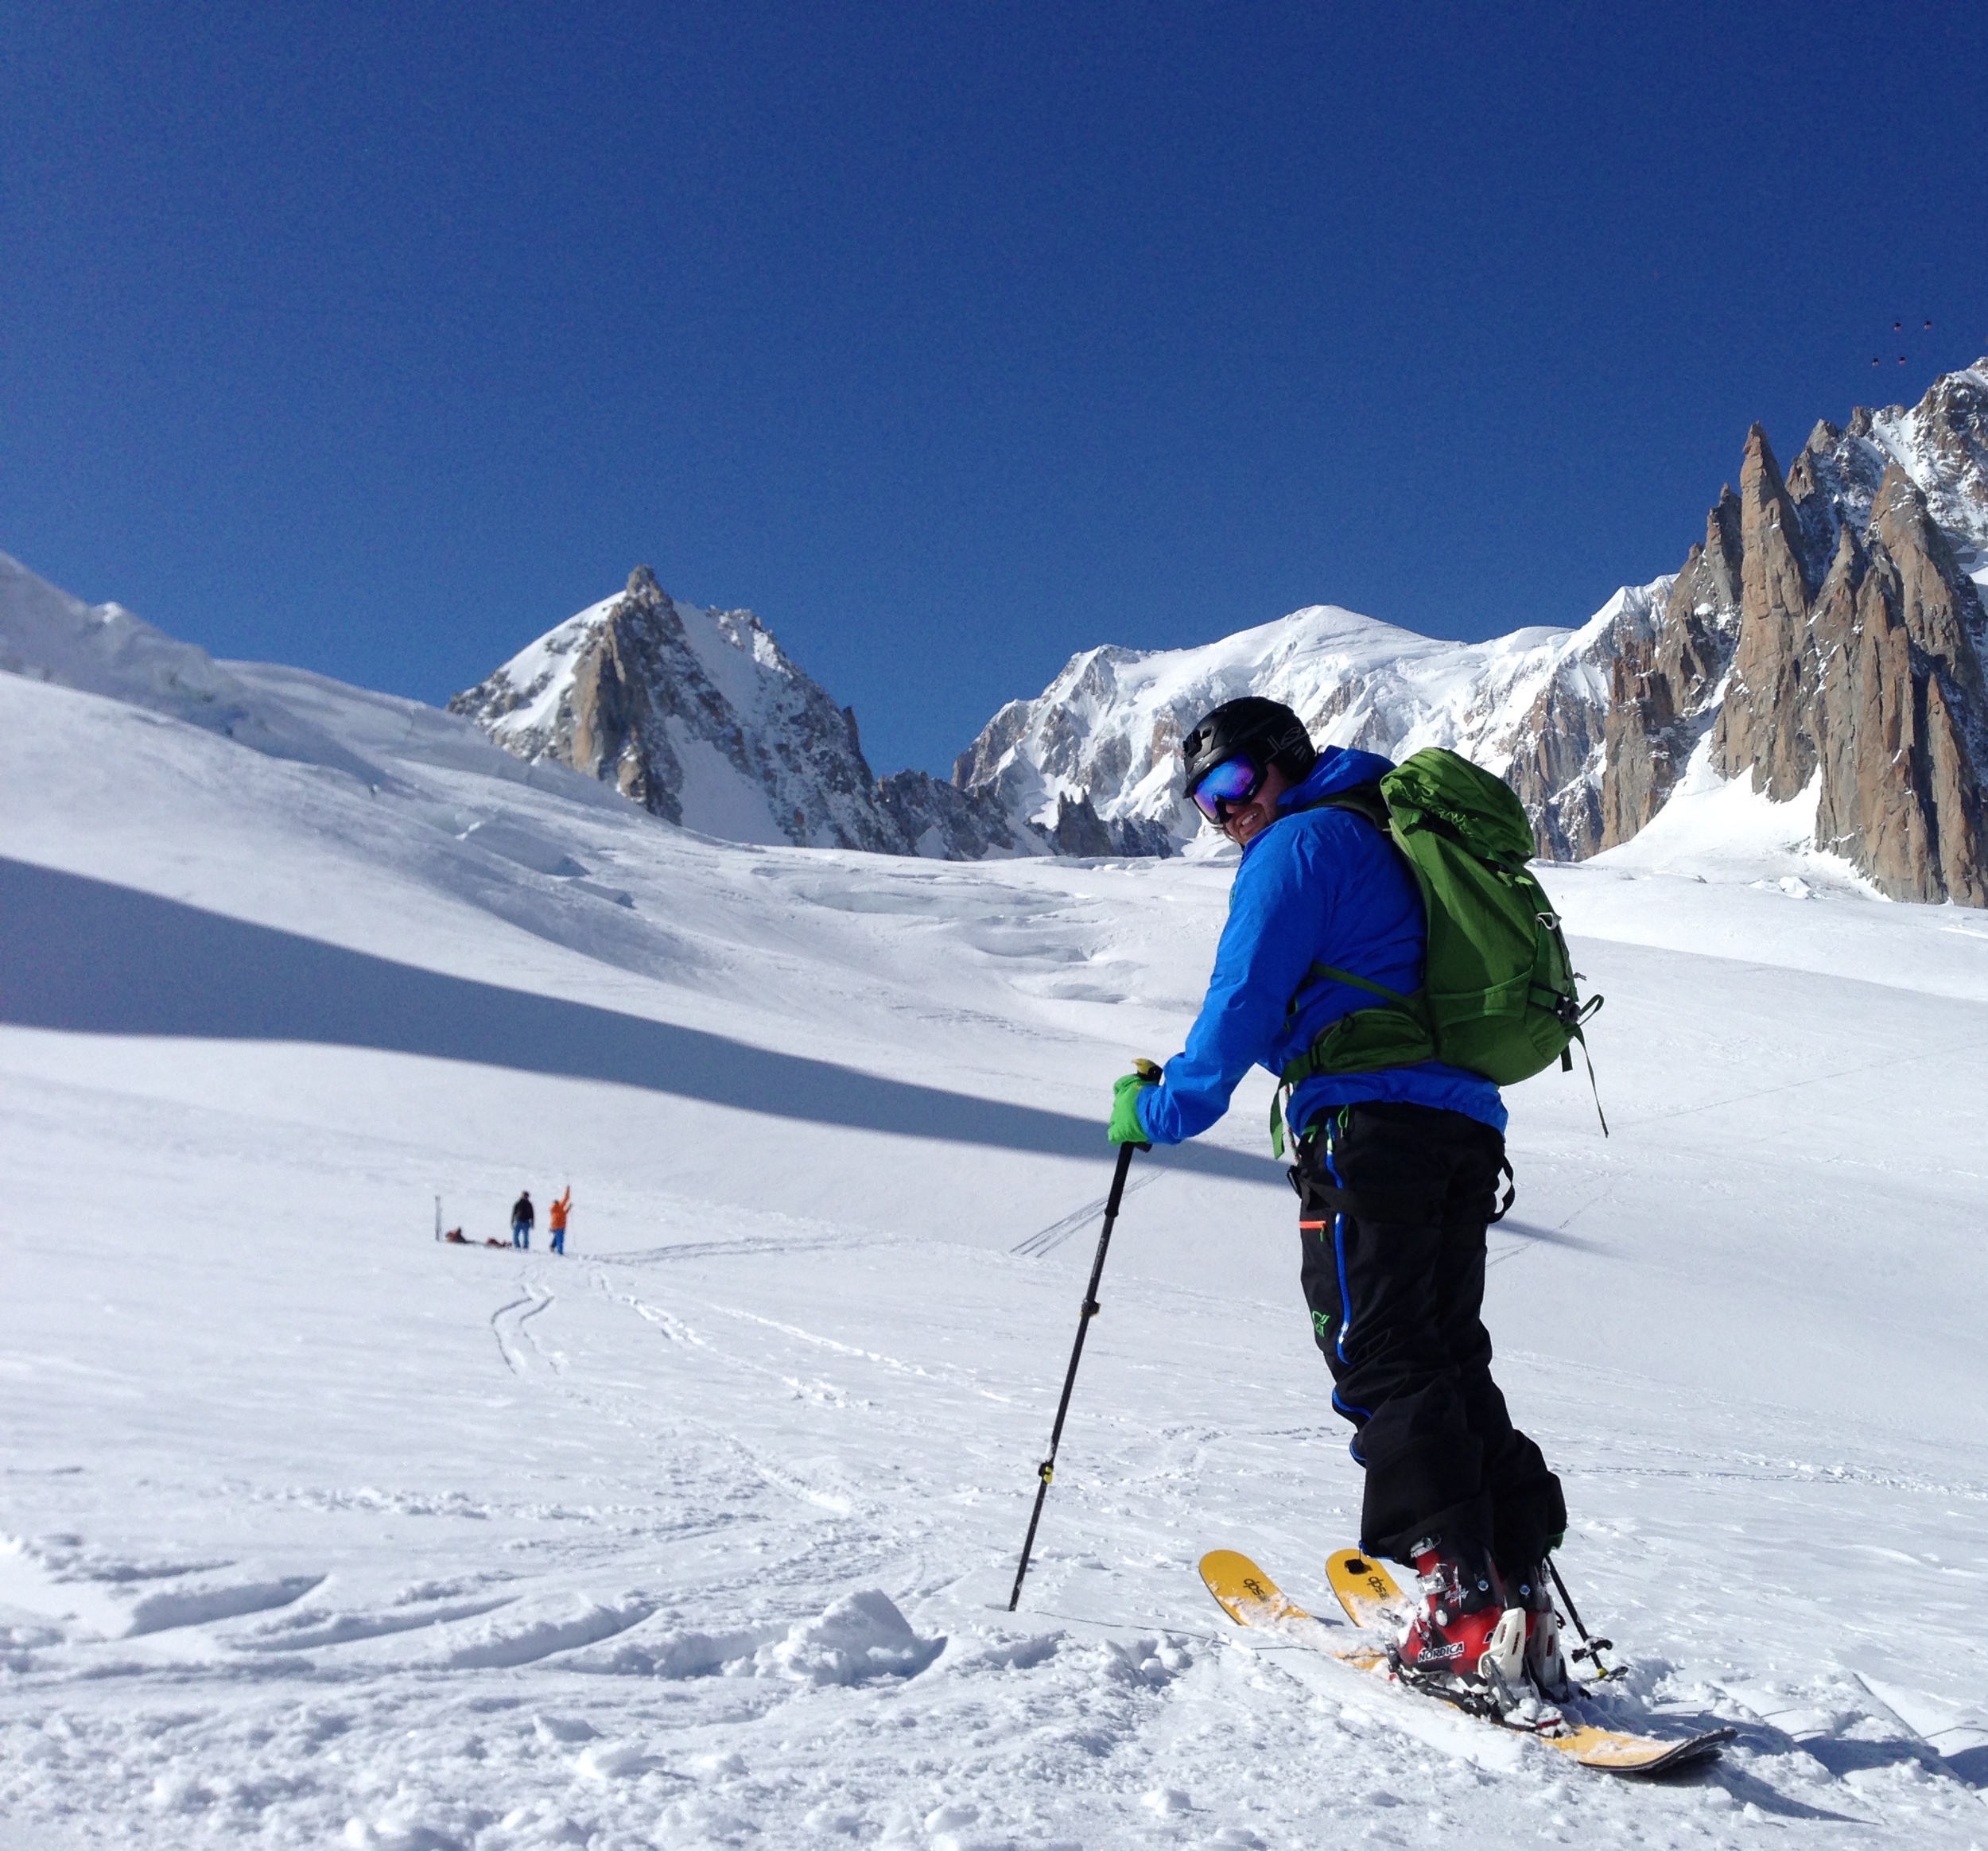 Ski Touring in the Vallee Blanche